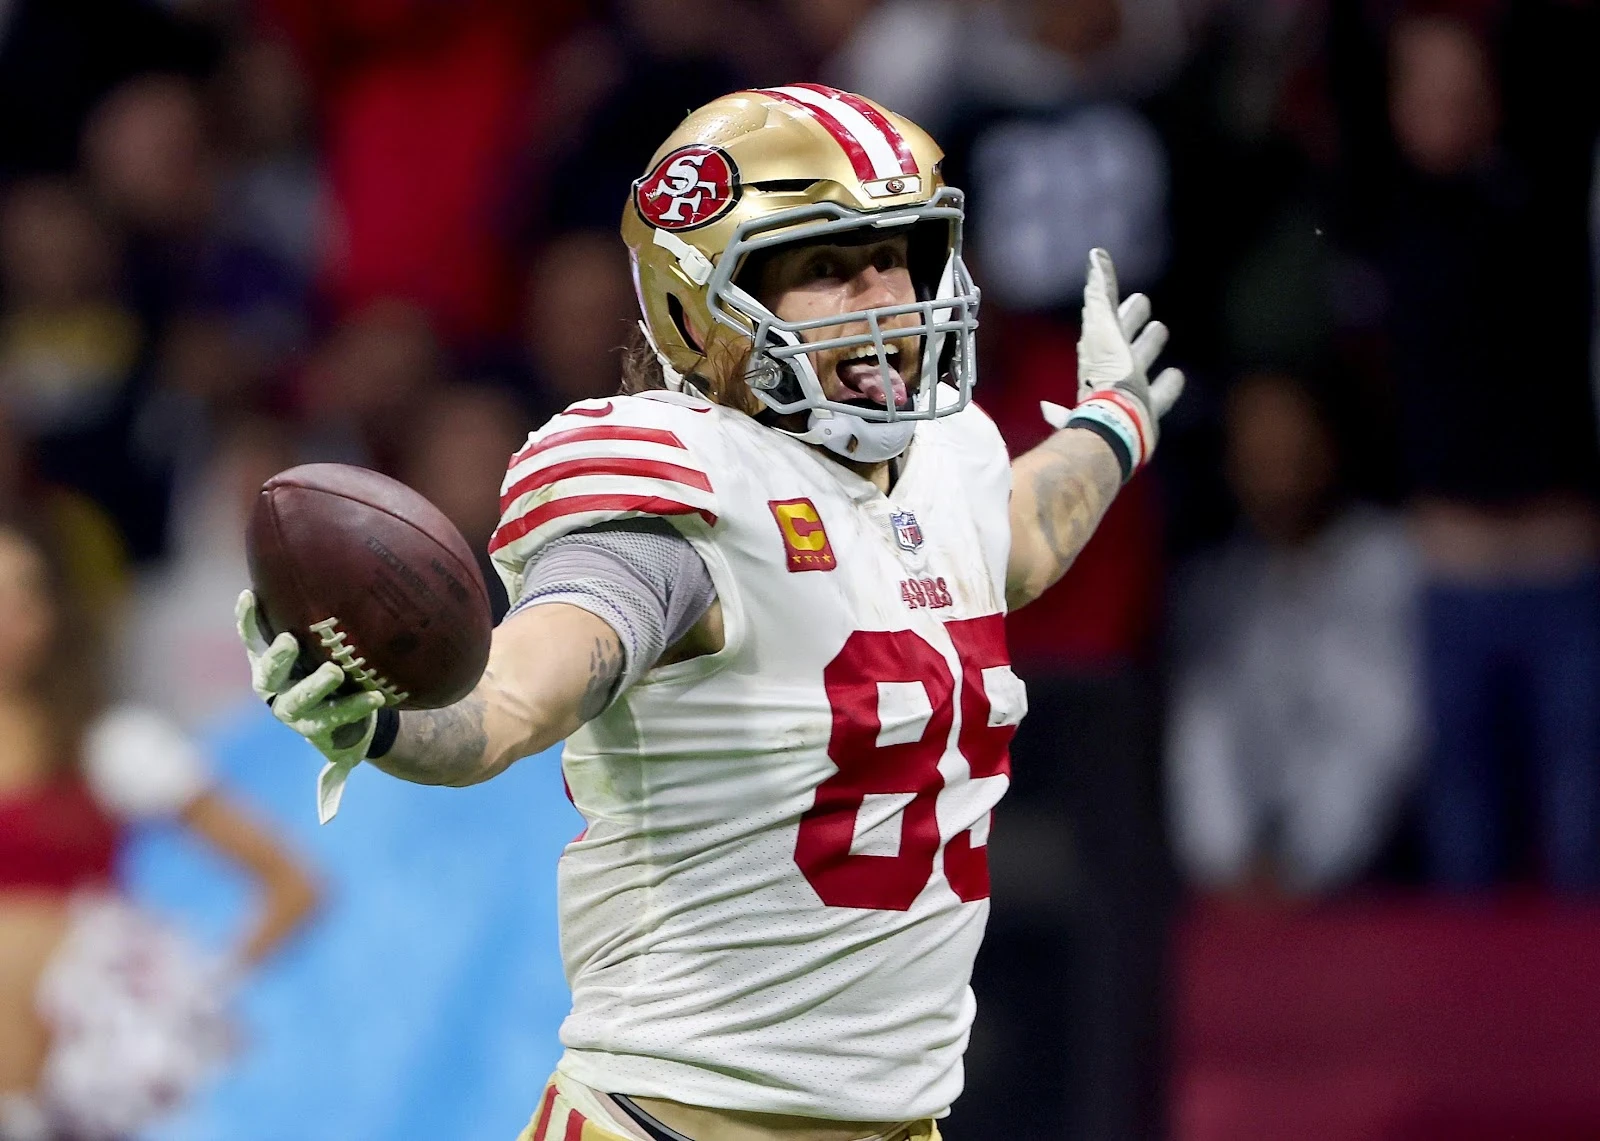 George Kittle #85 of the San Francisco 49ers scores a touchdown.